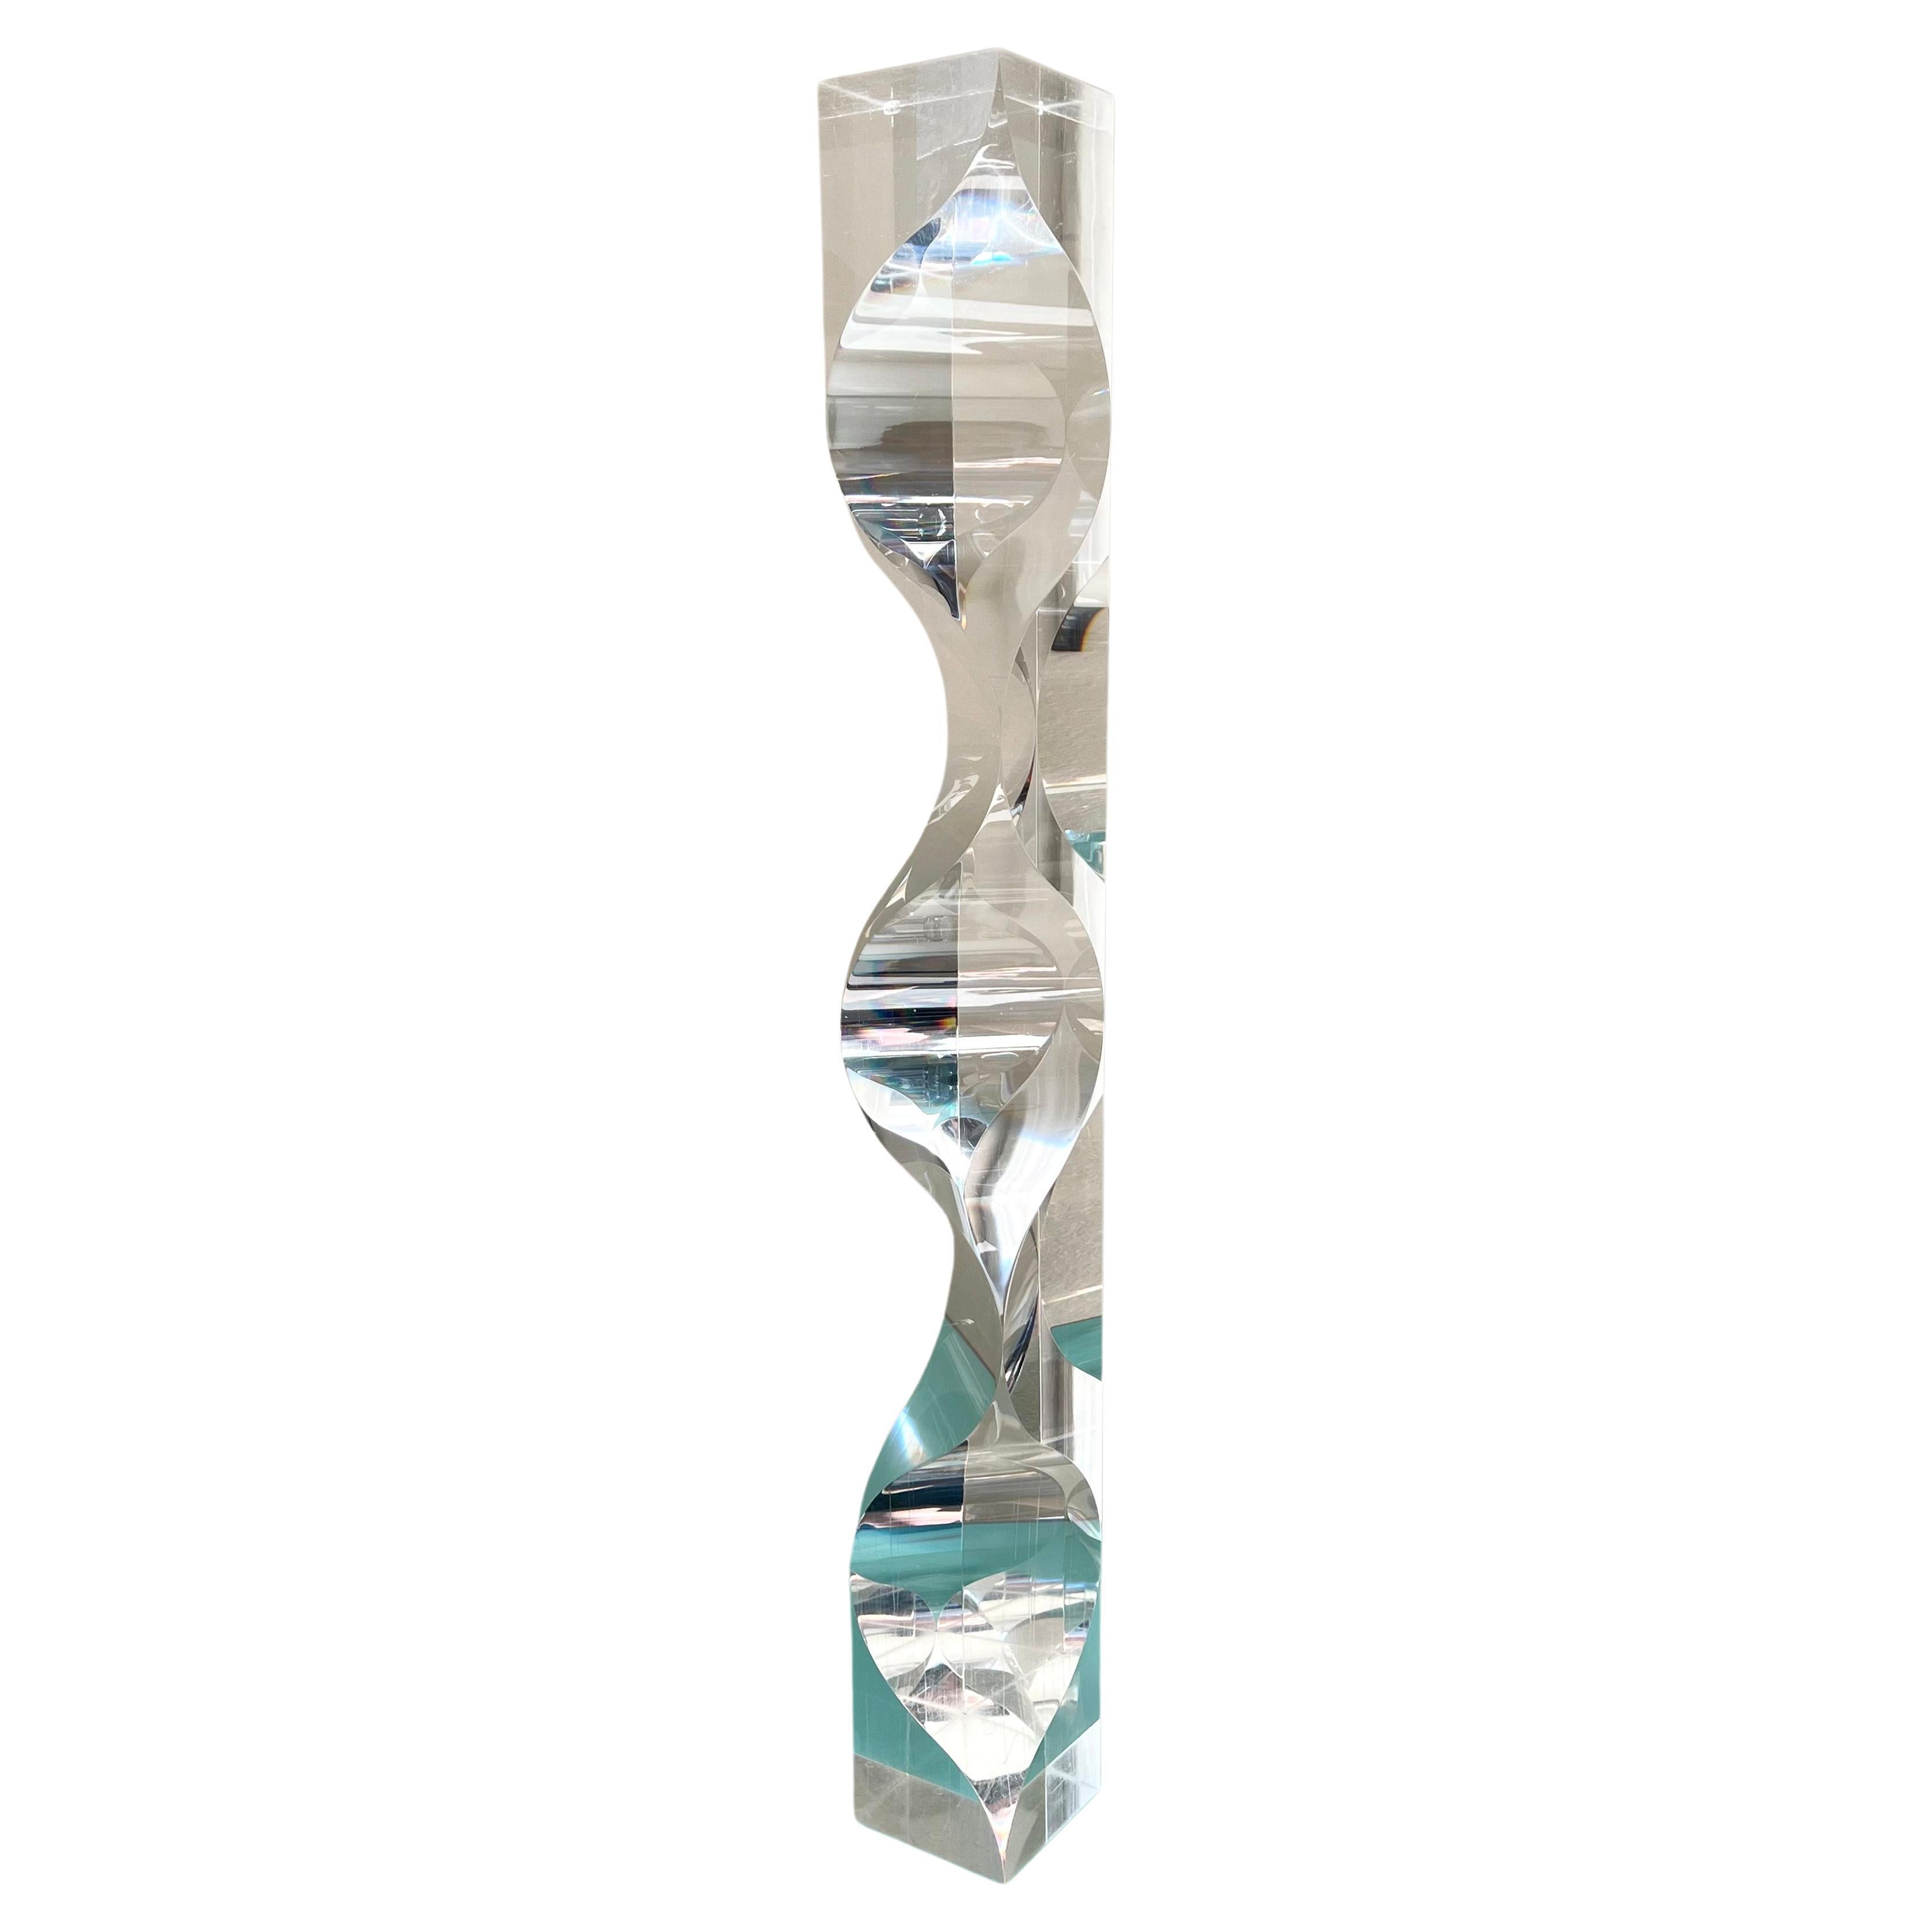 Alessio Tasca for Fusina Acrylic Lucite Prism Tower Sculpture In Good Condition For Sale In Palm Springs, CA